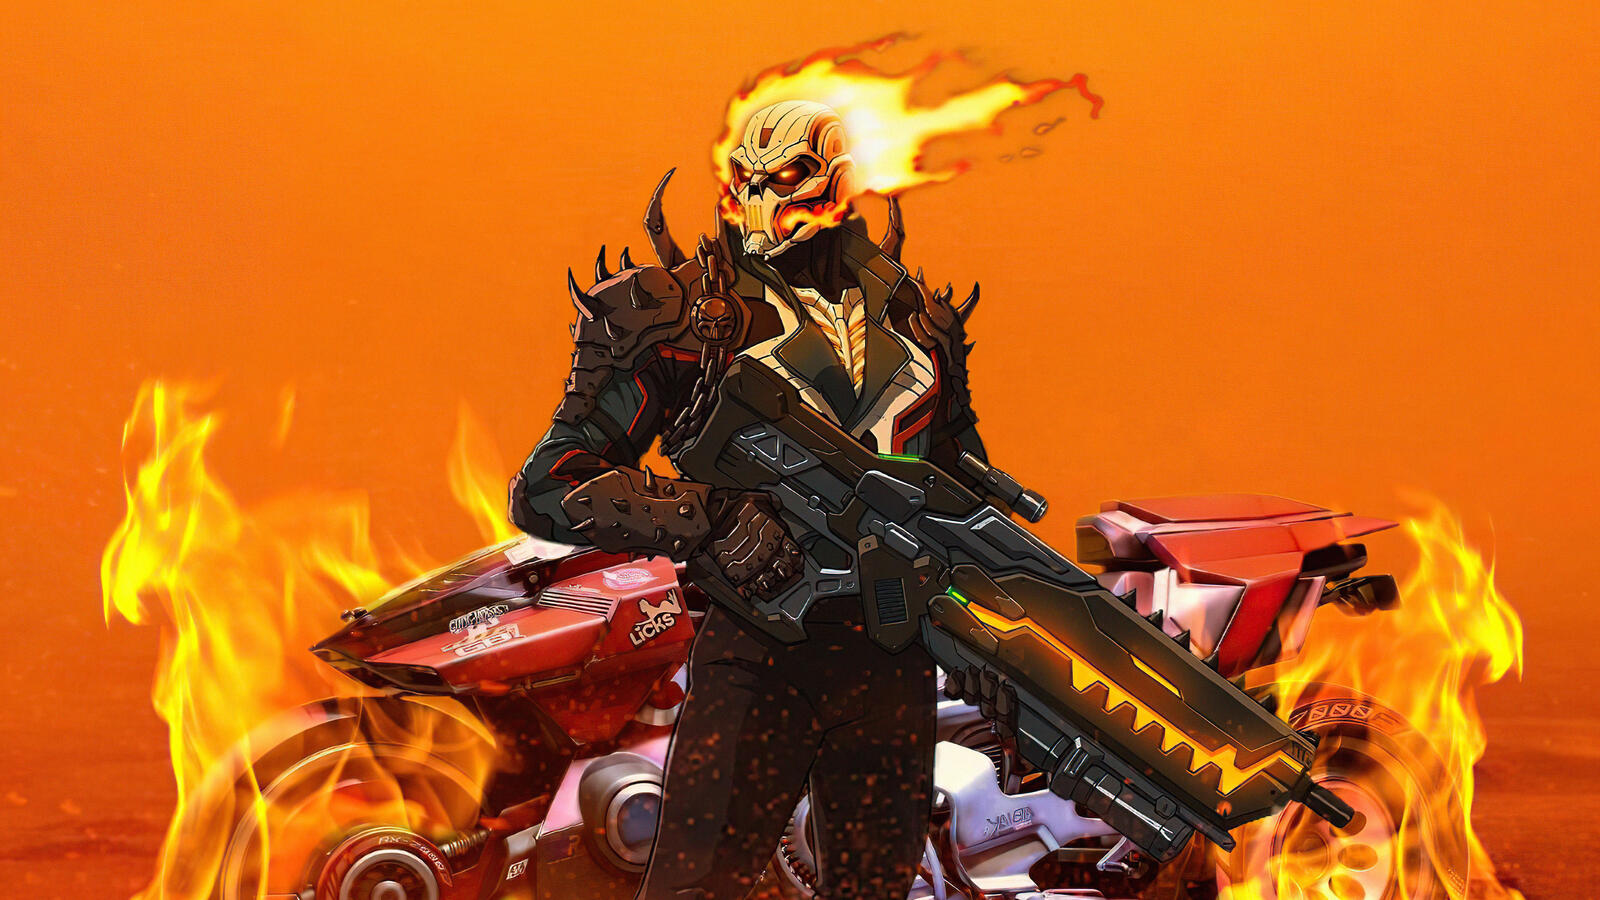 Wallpapers ghost rider weapons artwork on the desktop